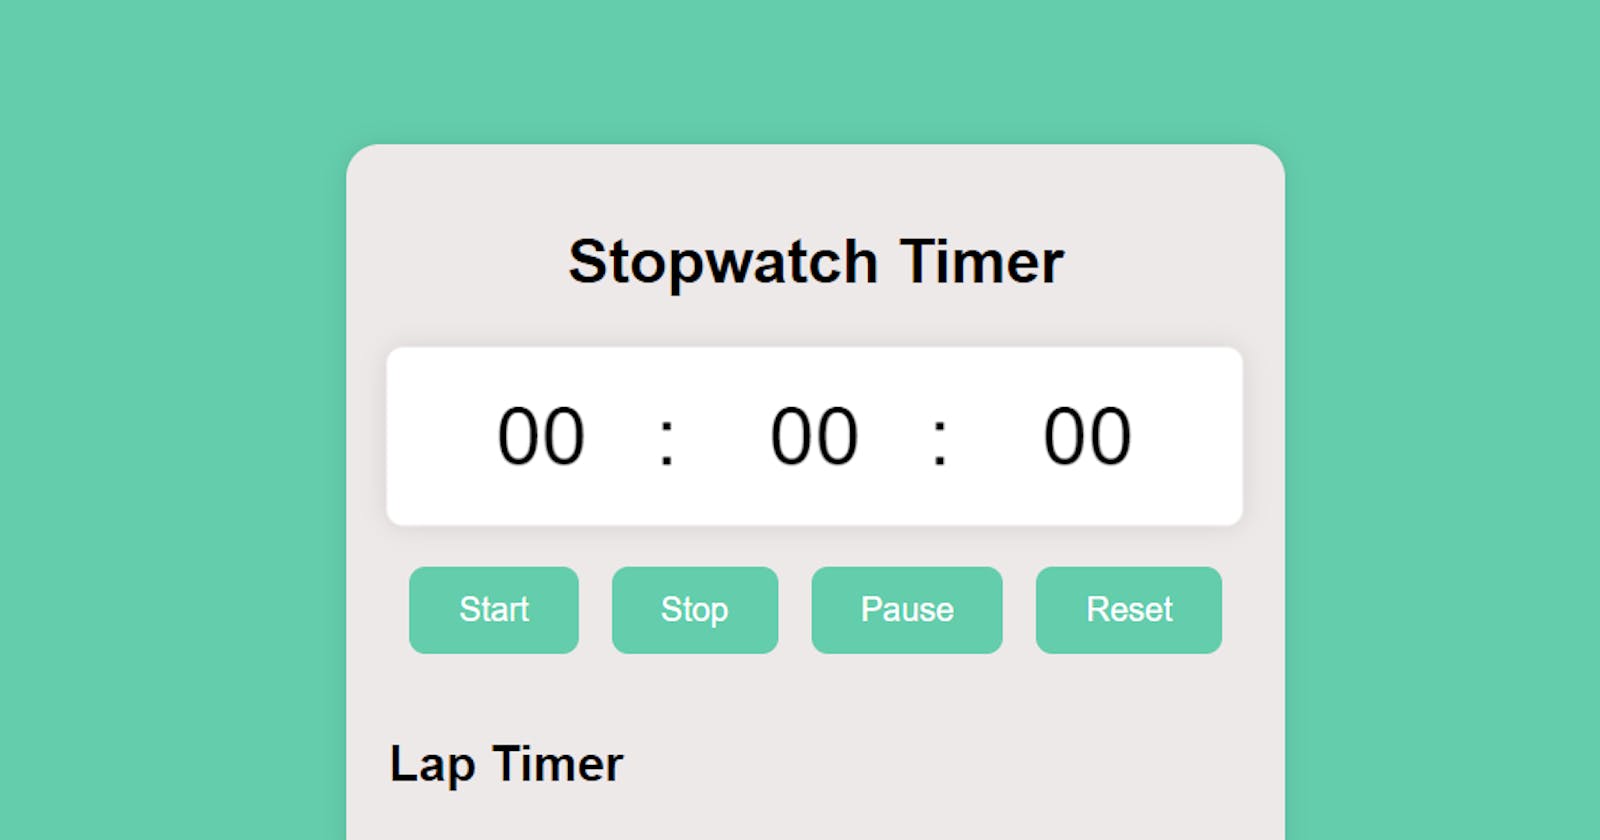 Building a Stylish Stopwatch Timer with HTML, CSS, and JavaScript